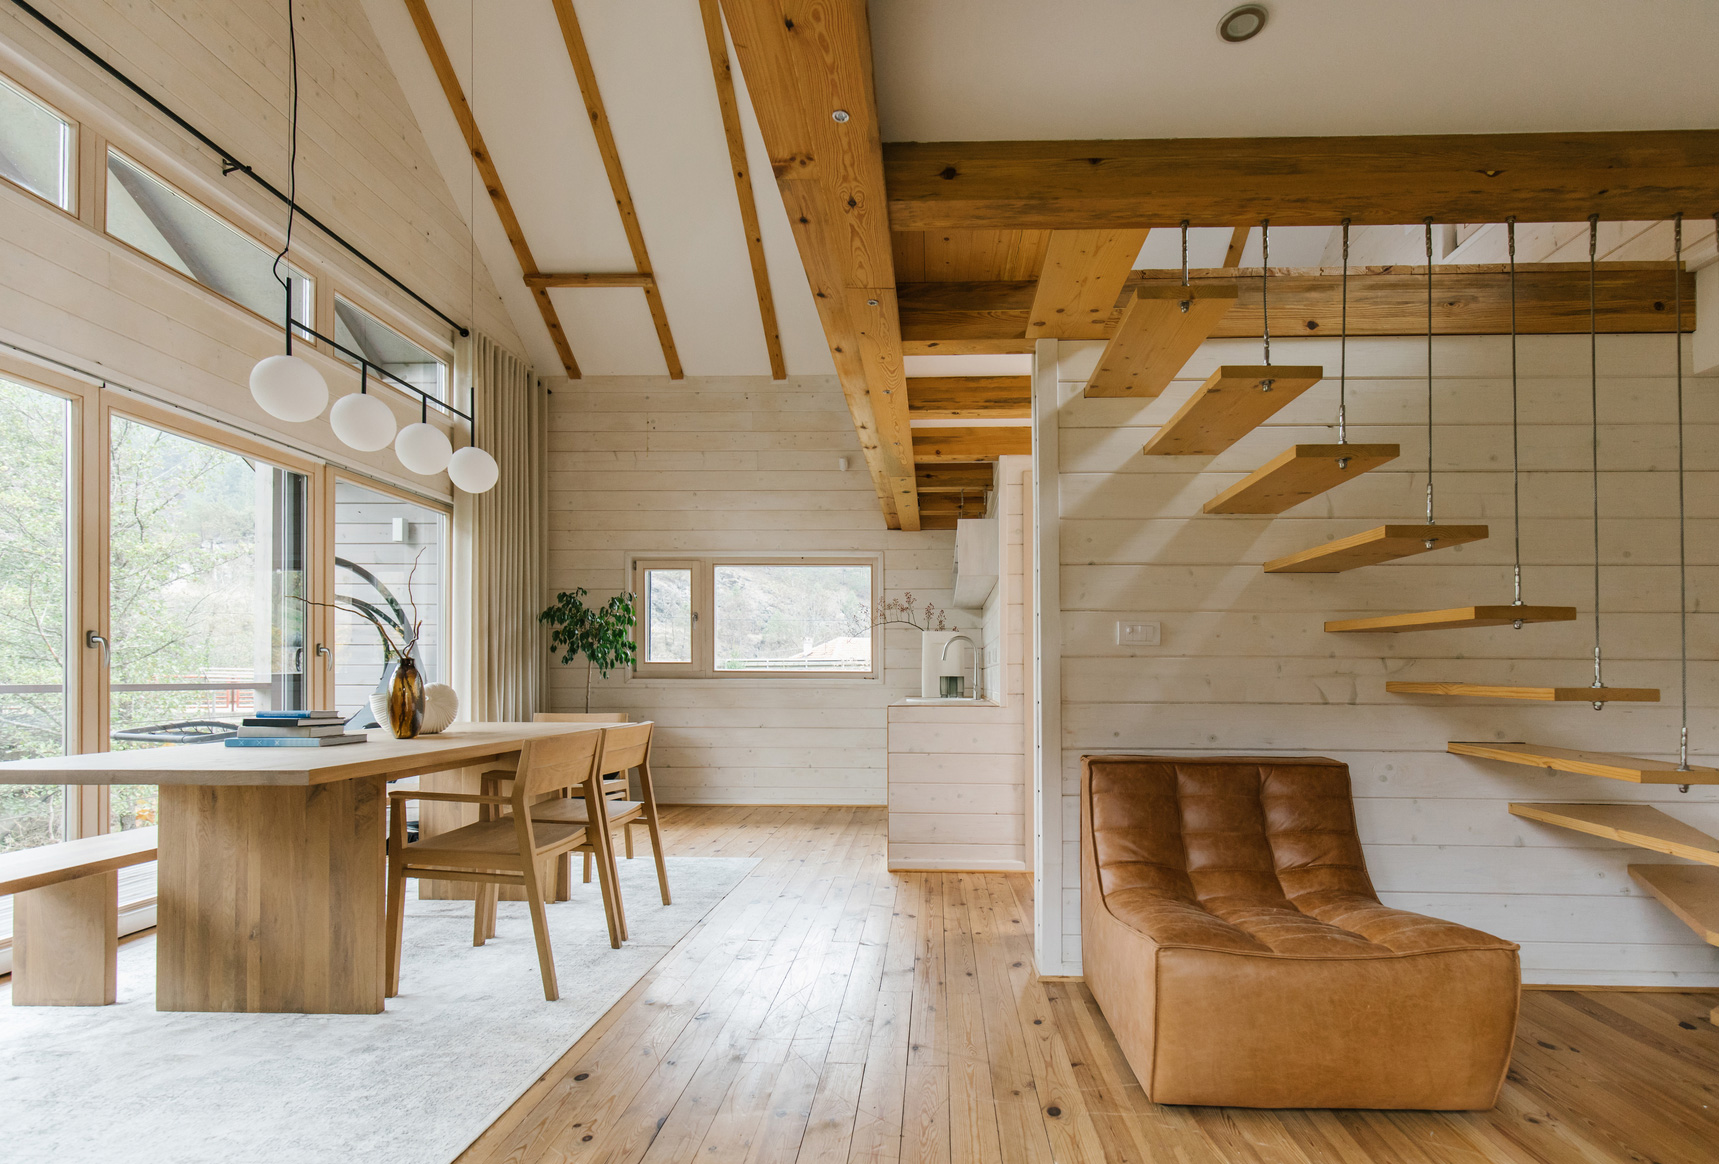 Interior of house designed in natural wood.